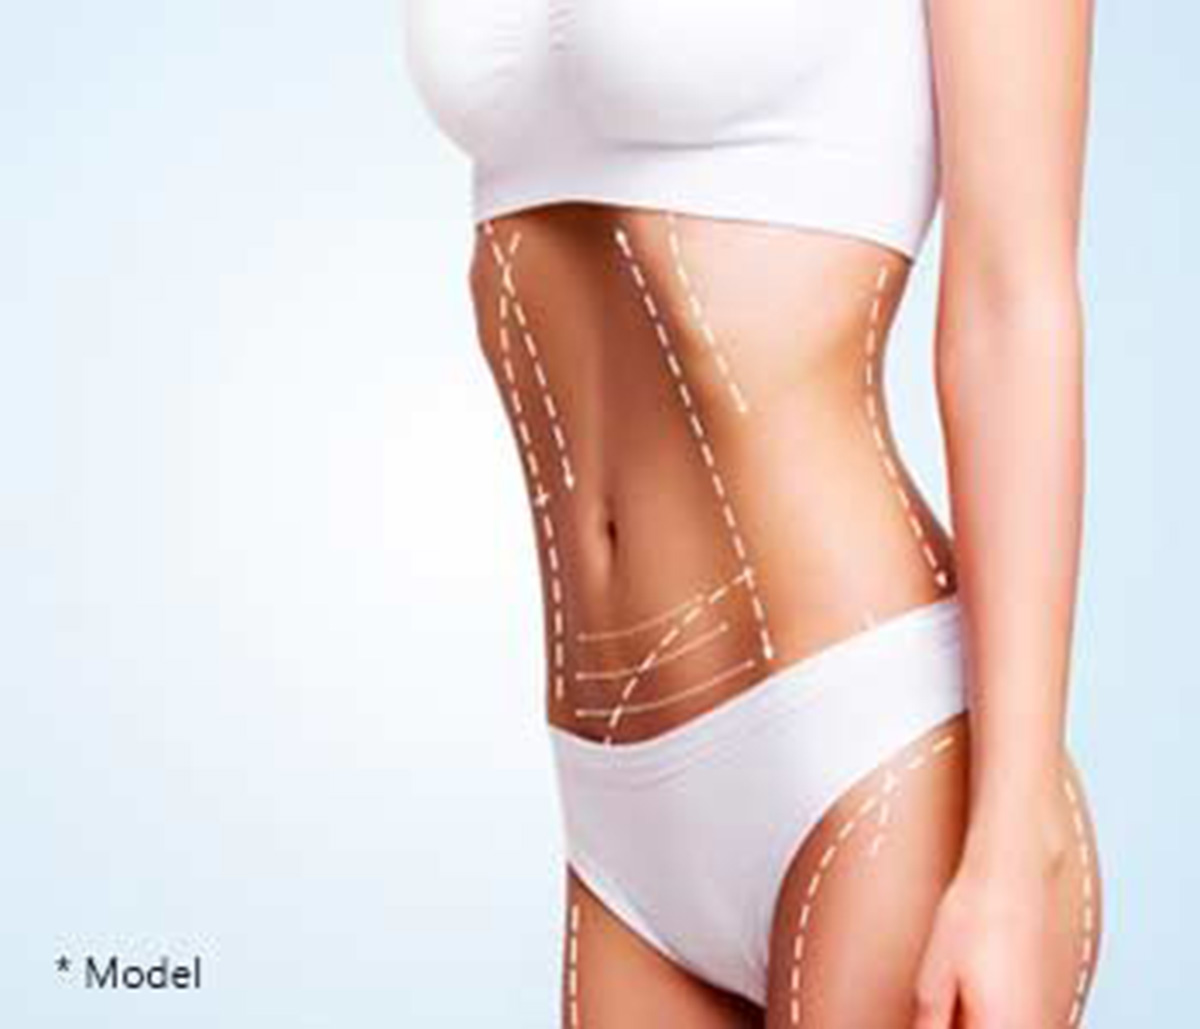 Plastic Surgeon in Beverly Hills Explains the Benefits of Liposuction